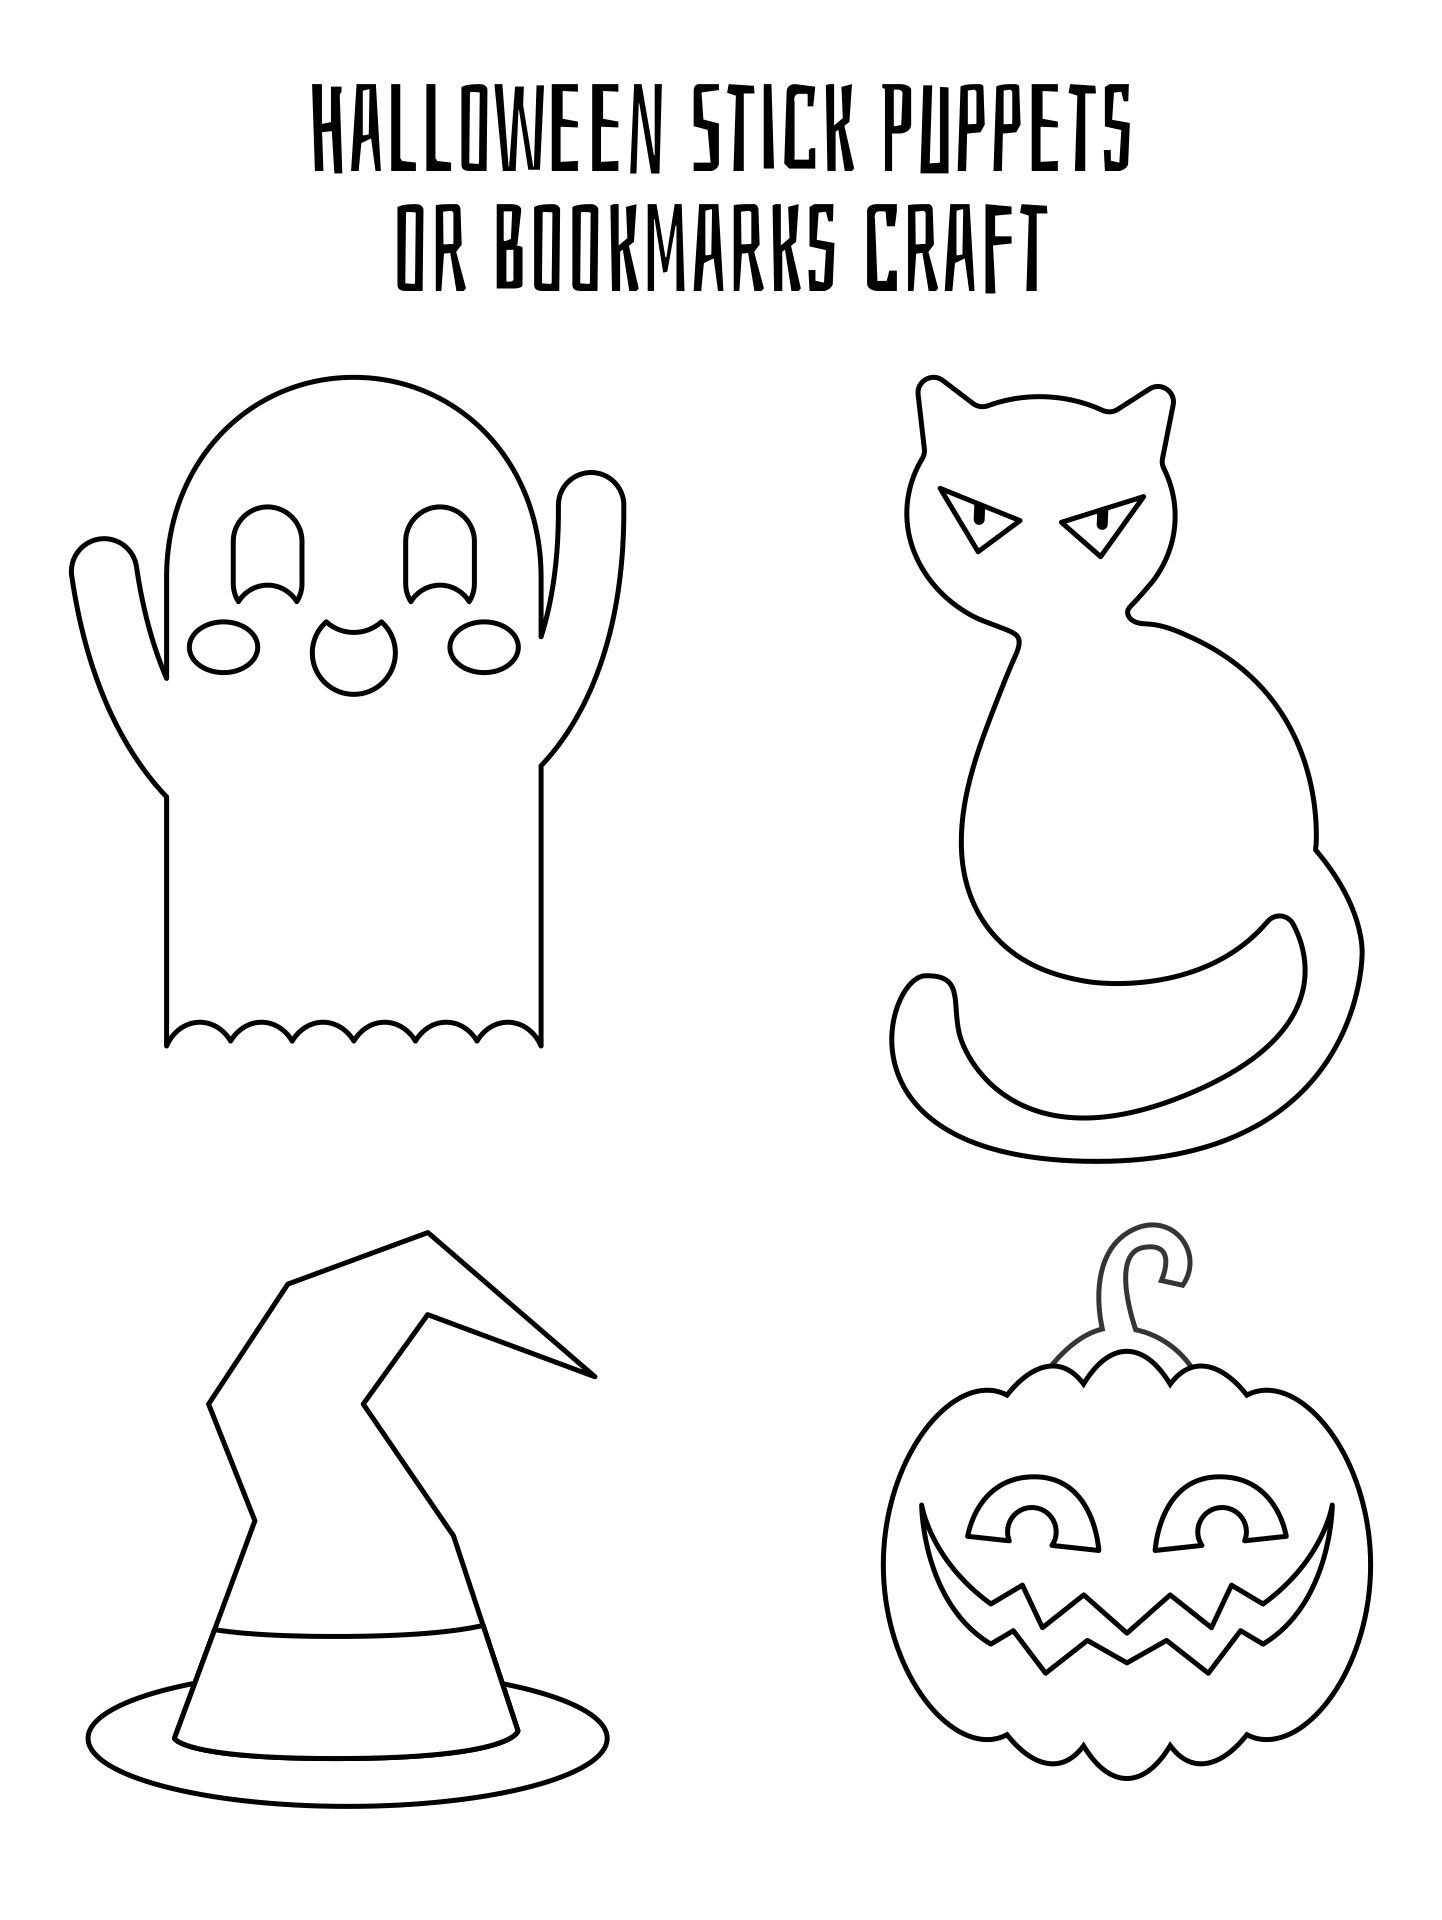 Halloween Stick Puppets Craft Bookmarks Printable Patterns